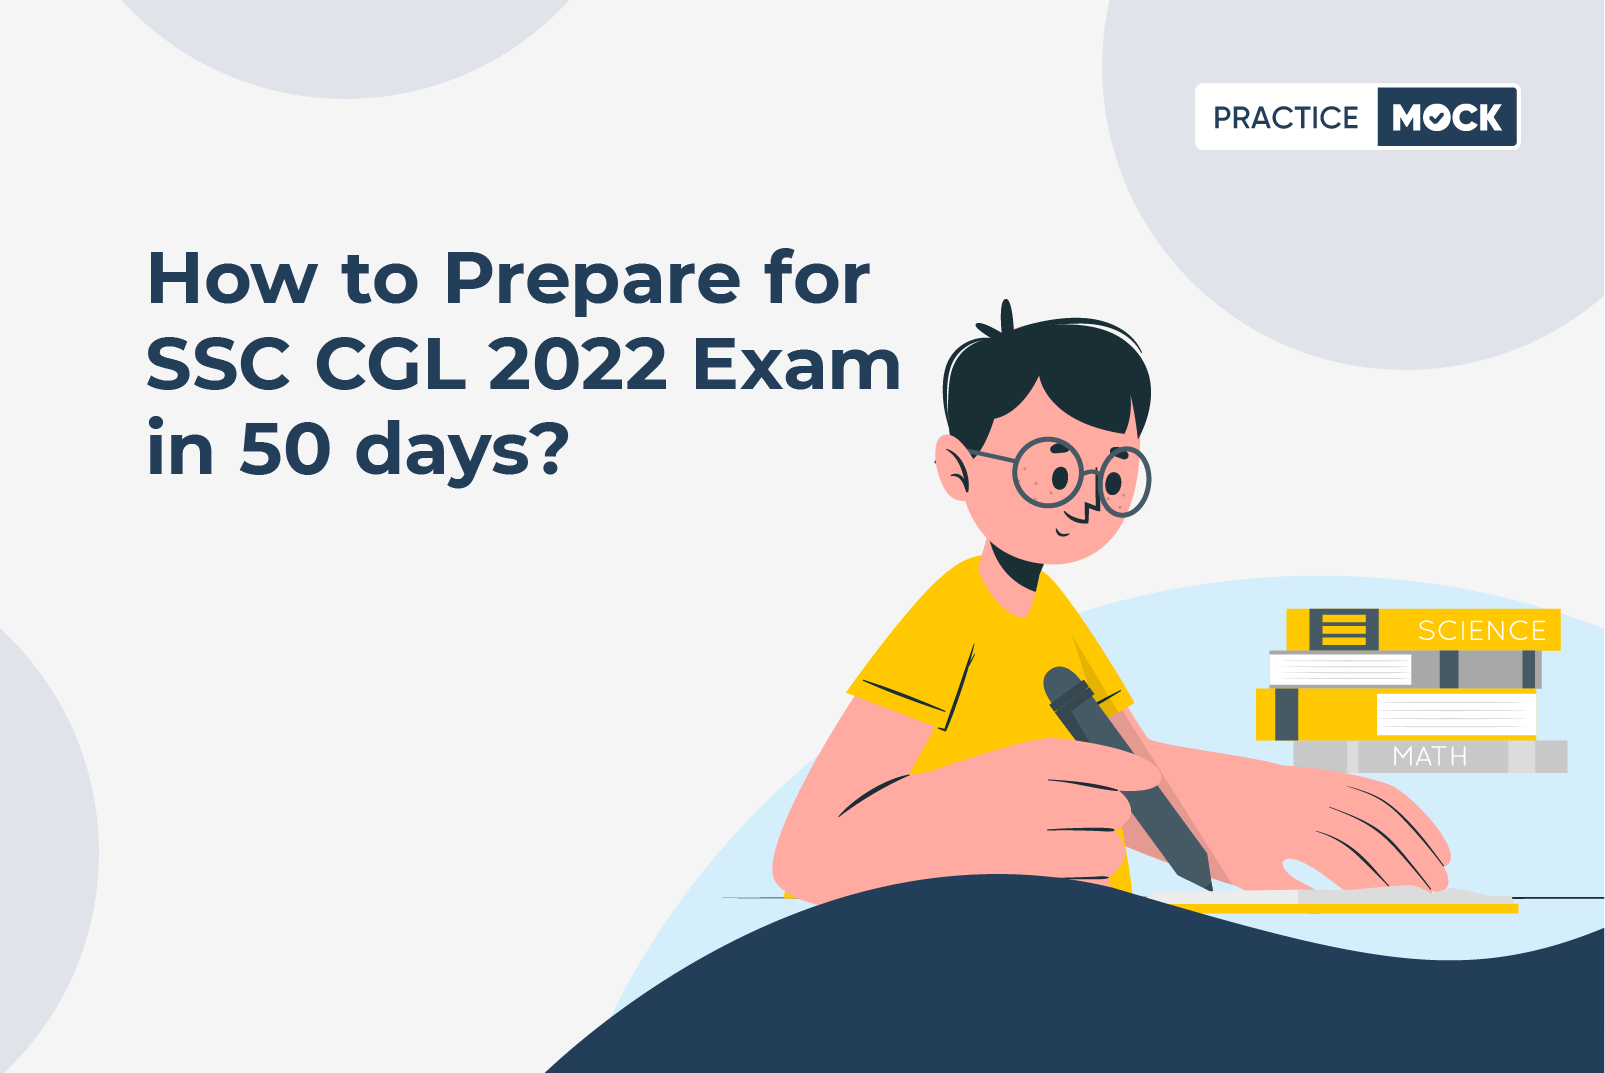 SSC CGL 2022 Tier 1-50 days study plan for Quick Preparation